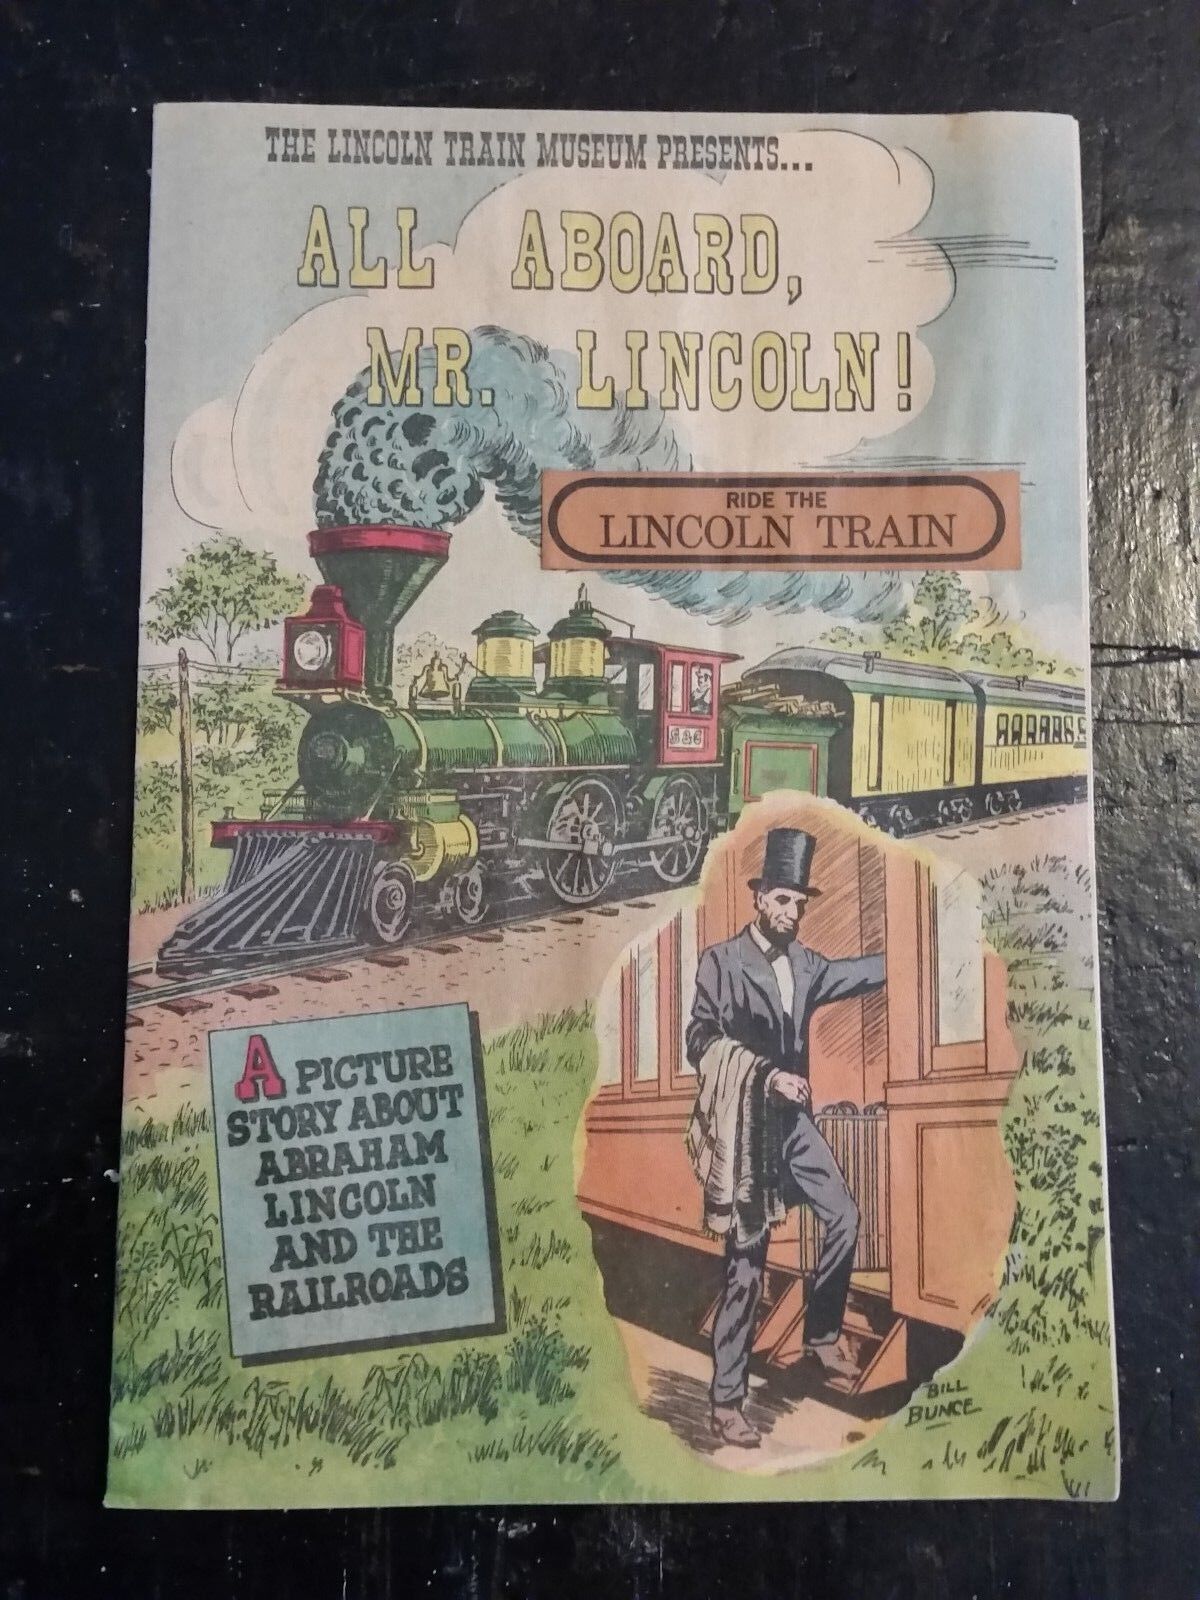 All Aboard, Mr. Lincoln advertising comic book